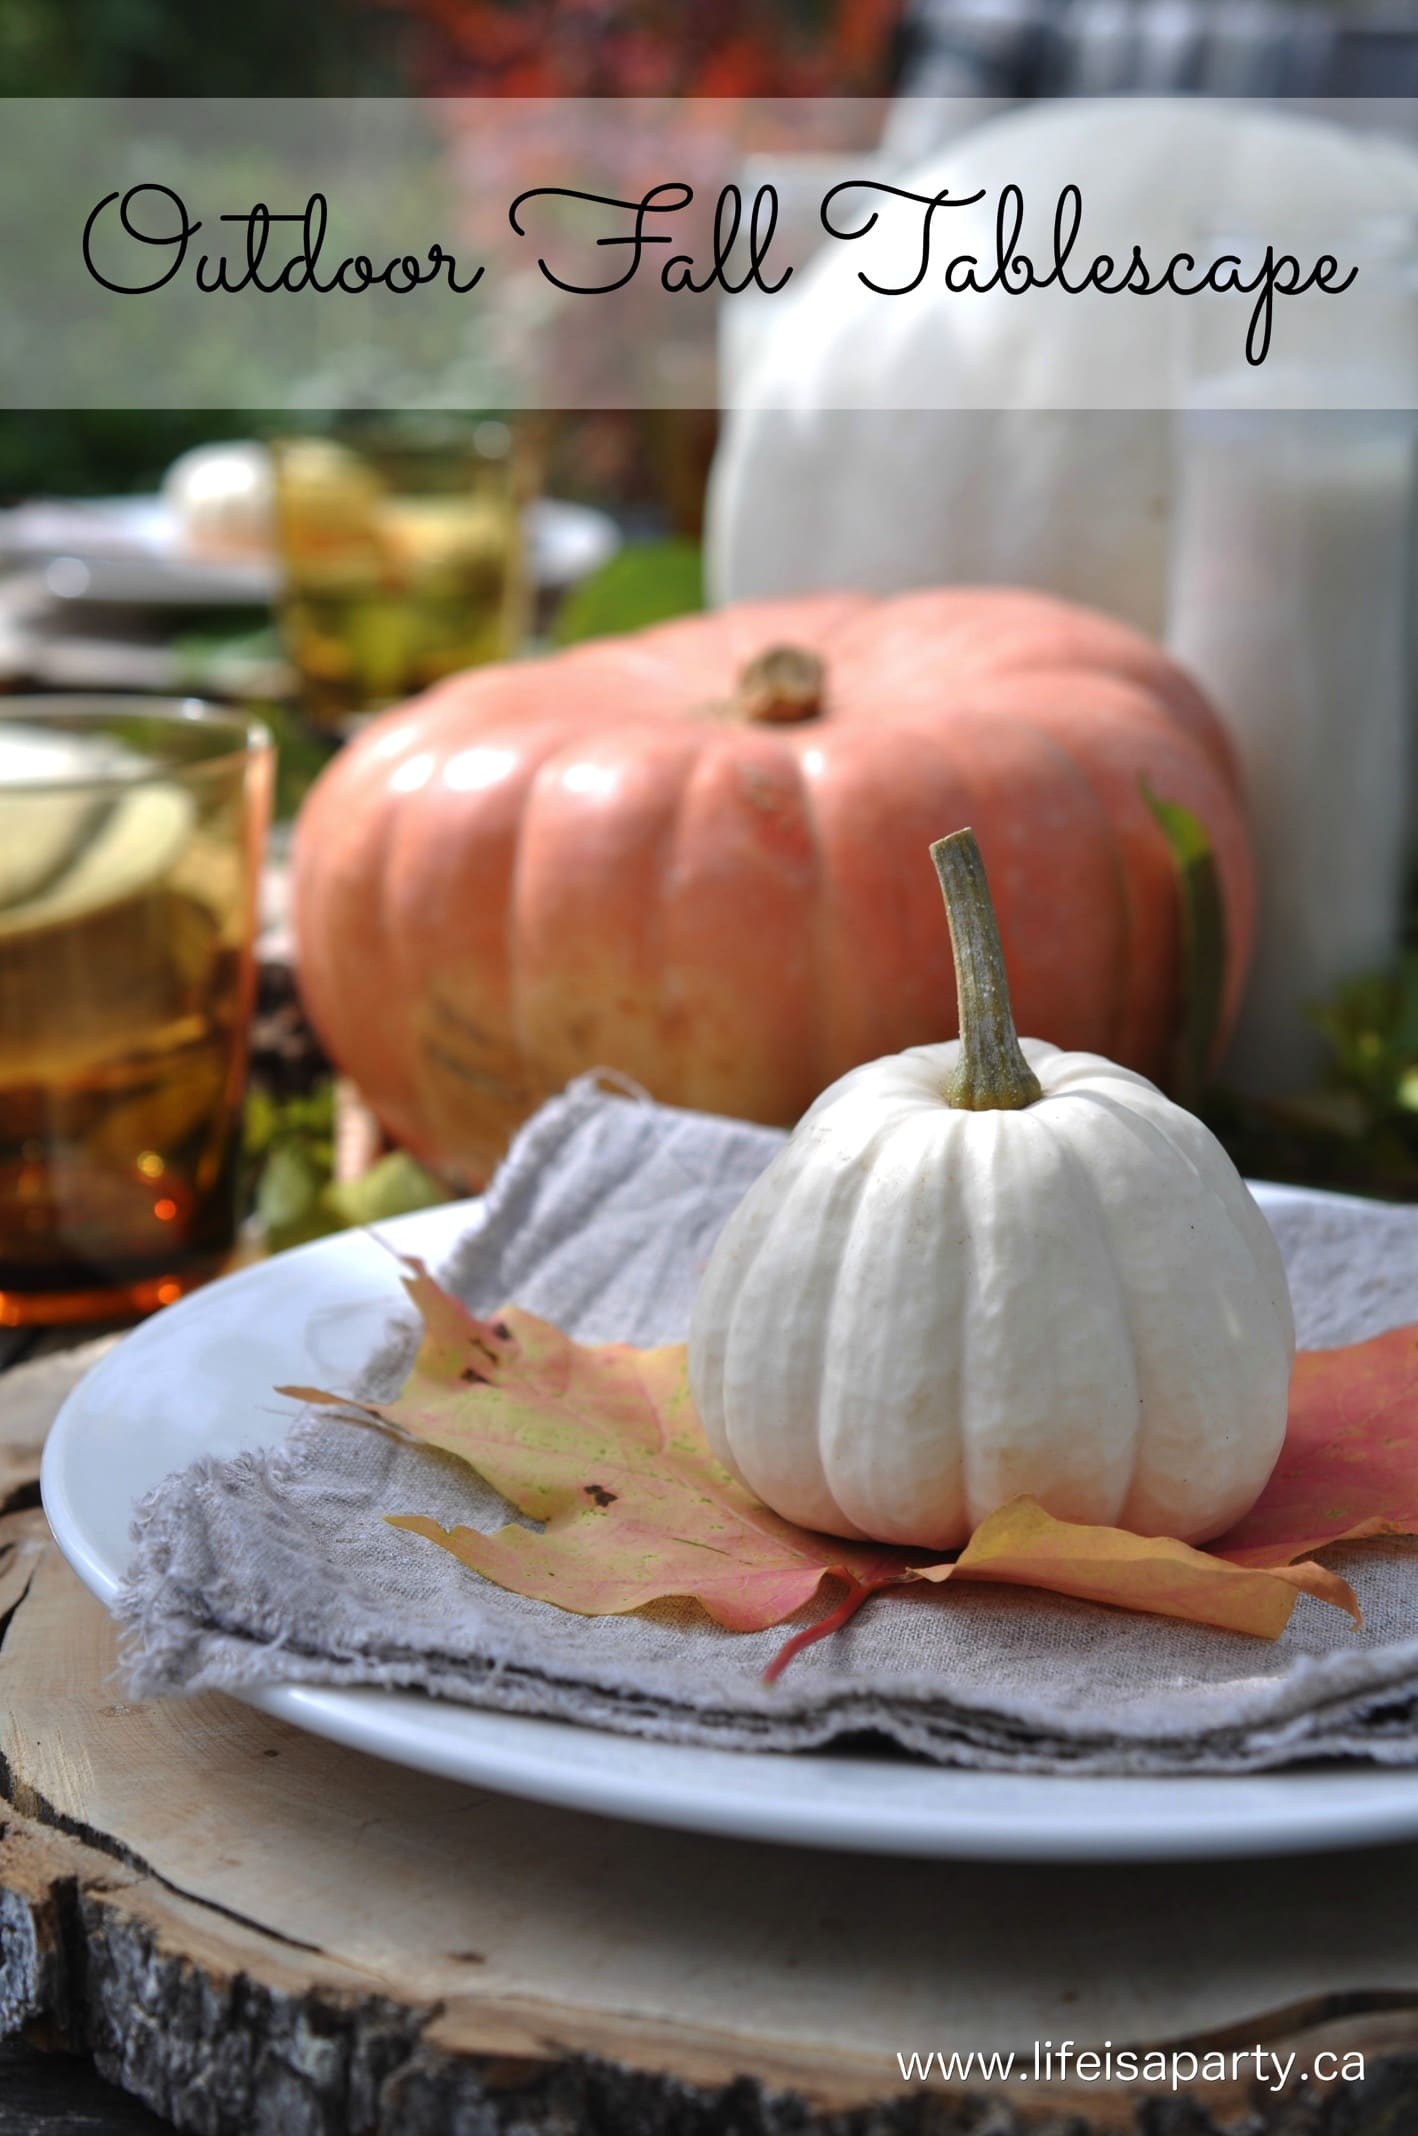 Outdoor Fall Tablescape: pretty pumpkins, leaves, lanterns, rustic wood, and cozy vintage plaid blankets make the perfect fall tablescape.